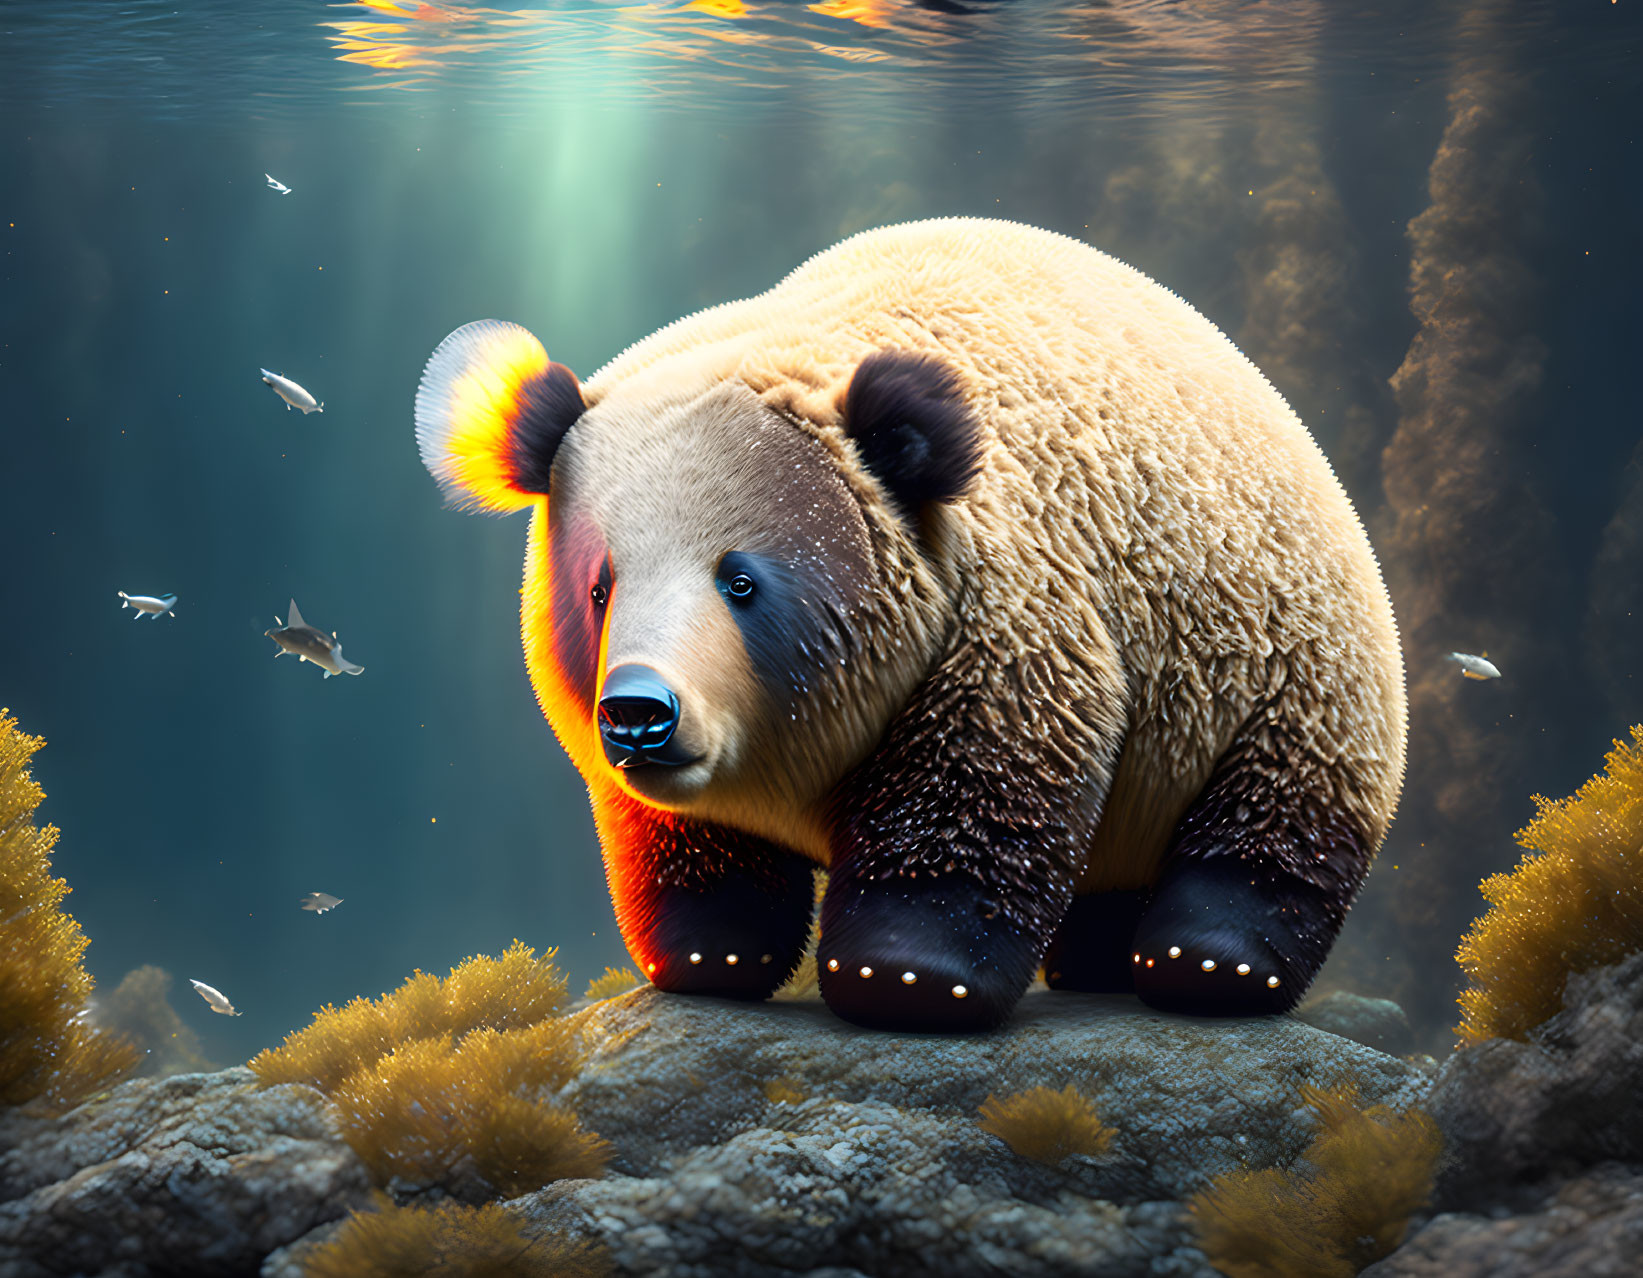 Colorful digital artwork: Bear with gradient fur near water and fish